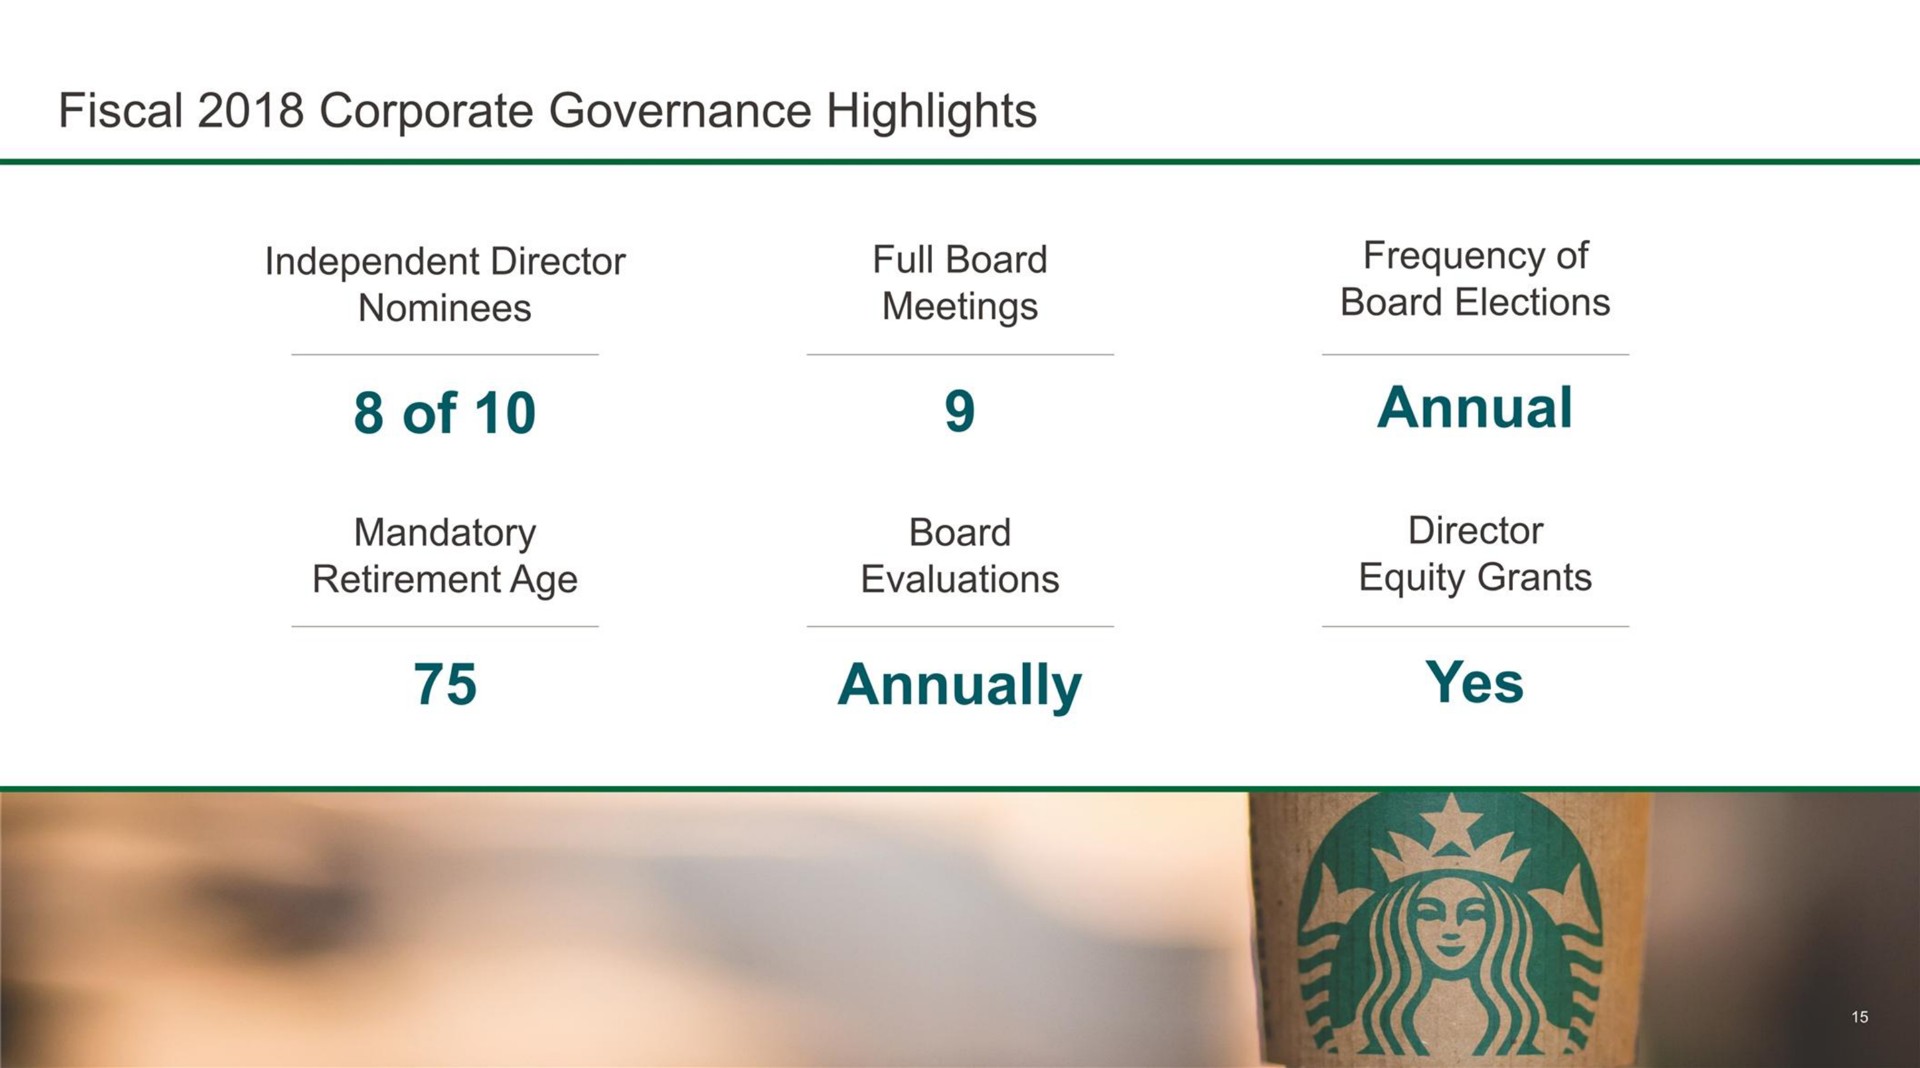 fiscal corporate governance highlights nominees of meetings annually board elections annual yes | Starbucks